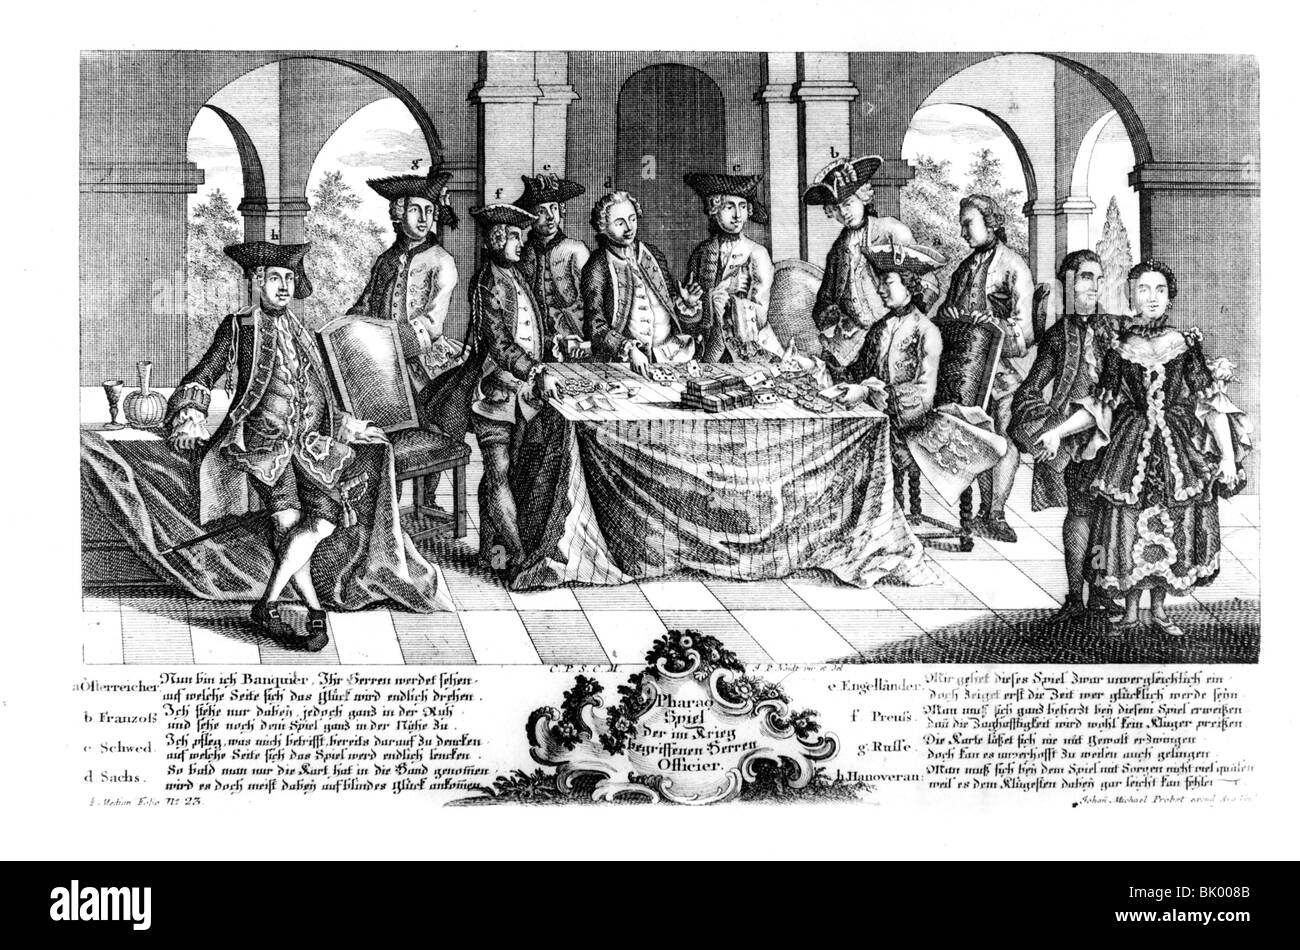 Seven Years War 1756 - 1763, Allegorie, 'Faro Game of the Officers involved in the War', copper engraving by J. P. Kandt, printed by Johann Michel Probst, Augsburg, 1756, , Stock Photo